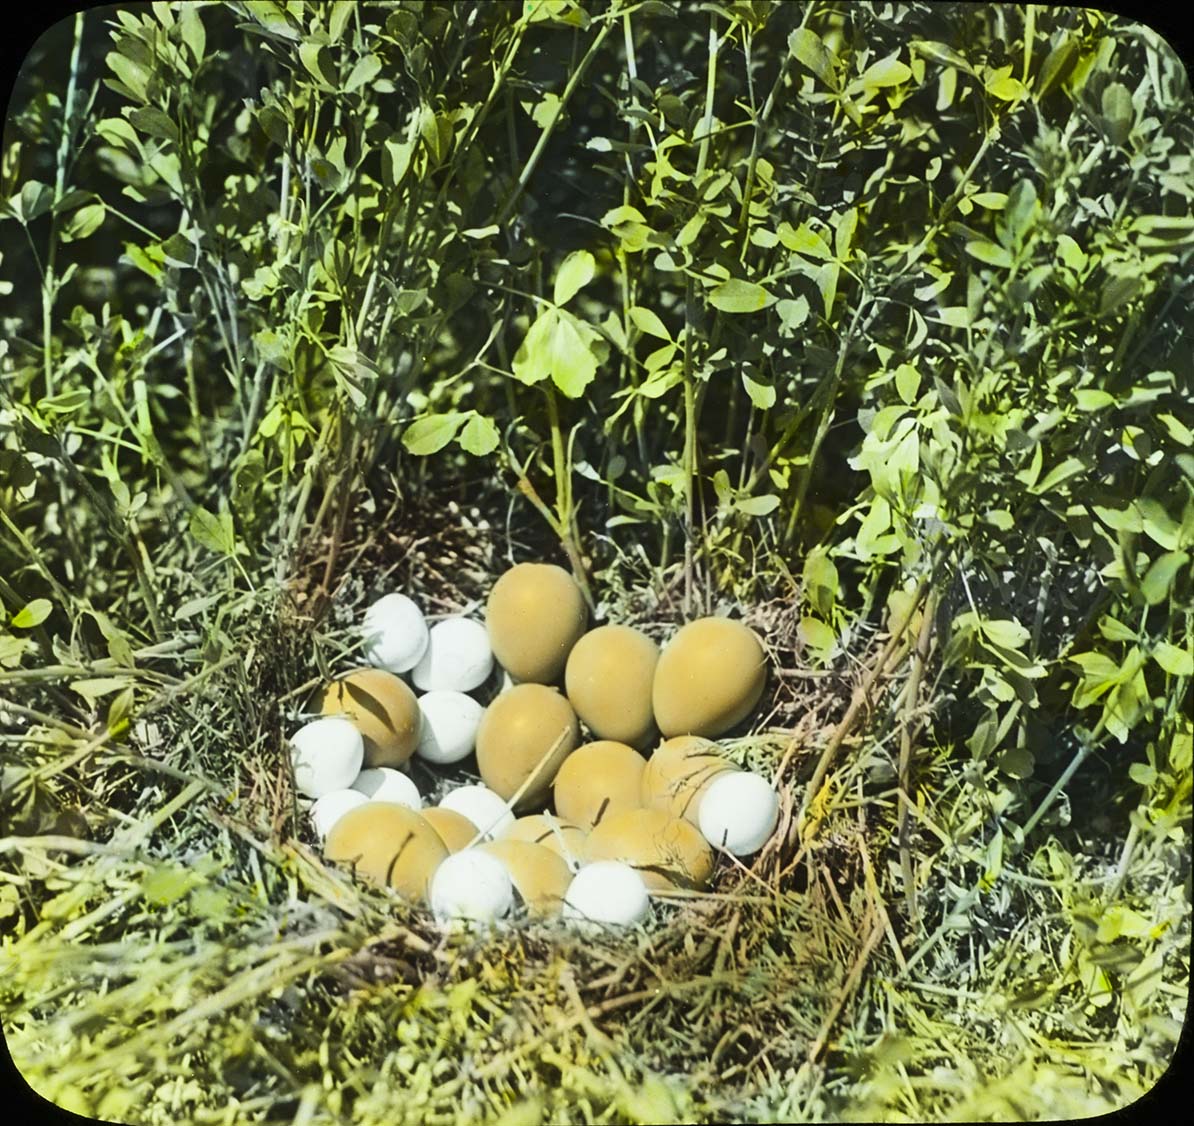 Lantern slide and photograph of Northern Bobwhite eggs and Pheasant eggs in a nest